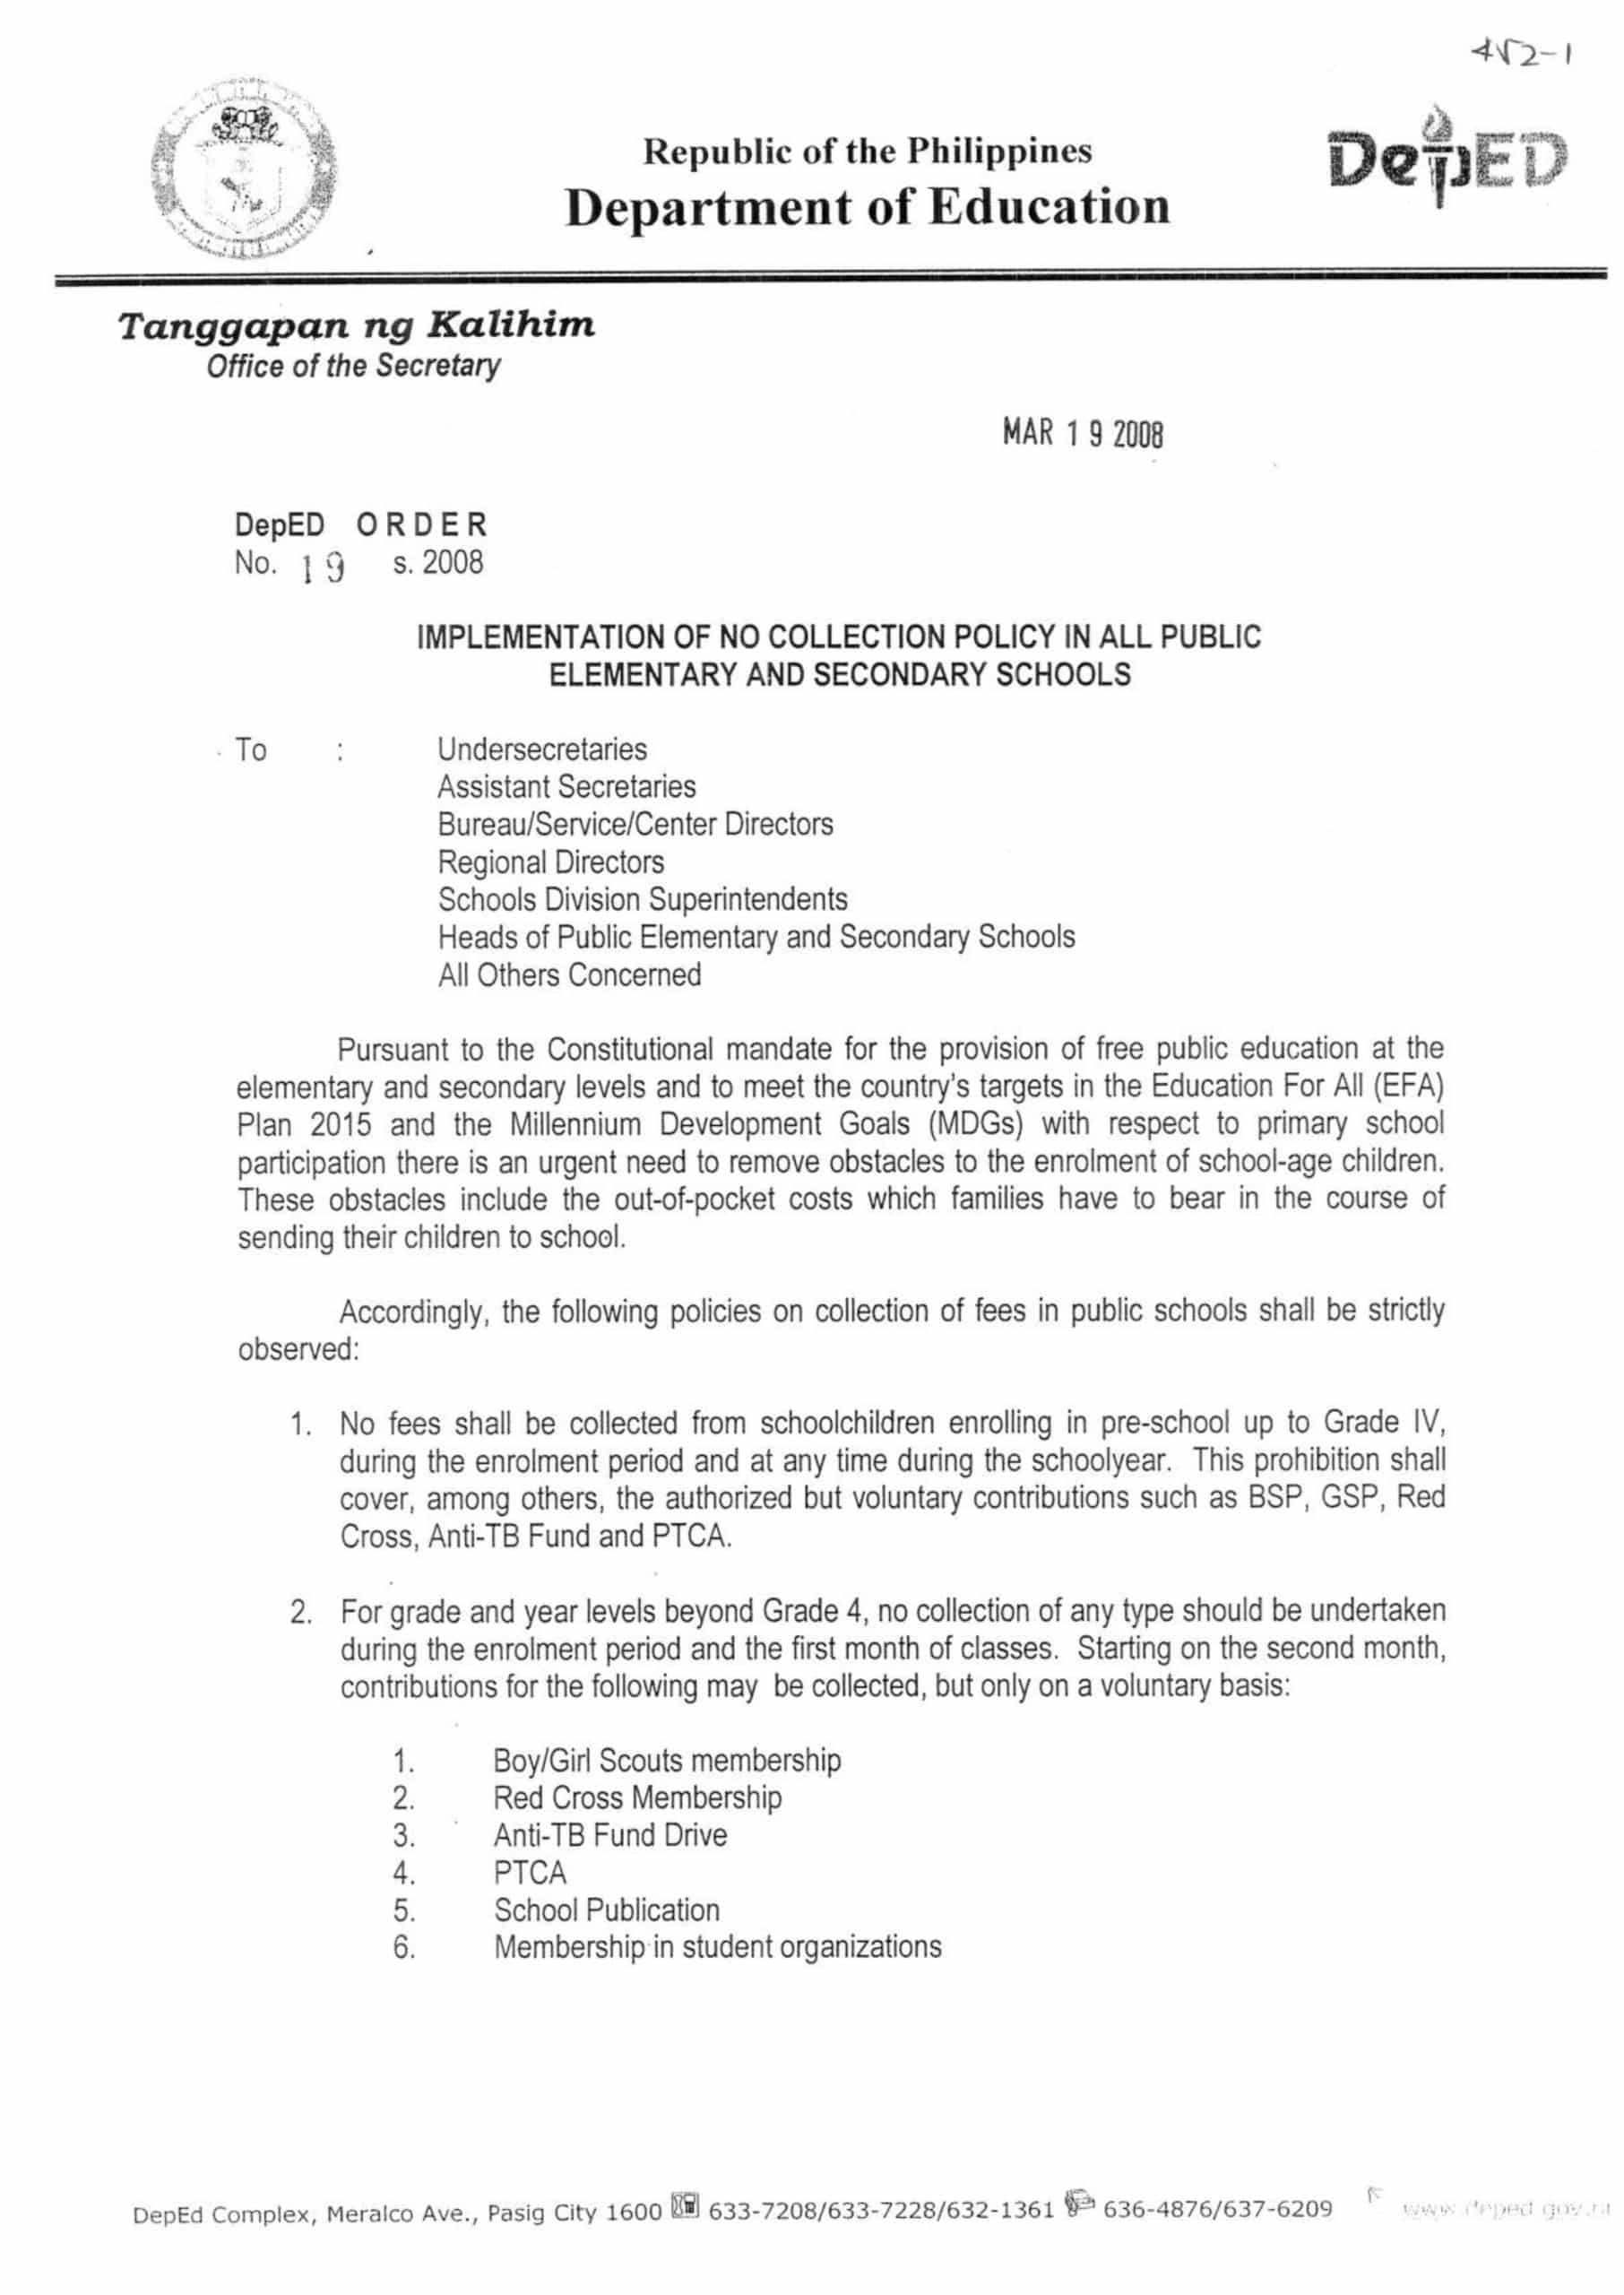 DepEd Order on No Collection Policy in All Public Schools TeacherPH